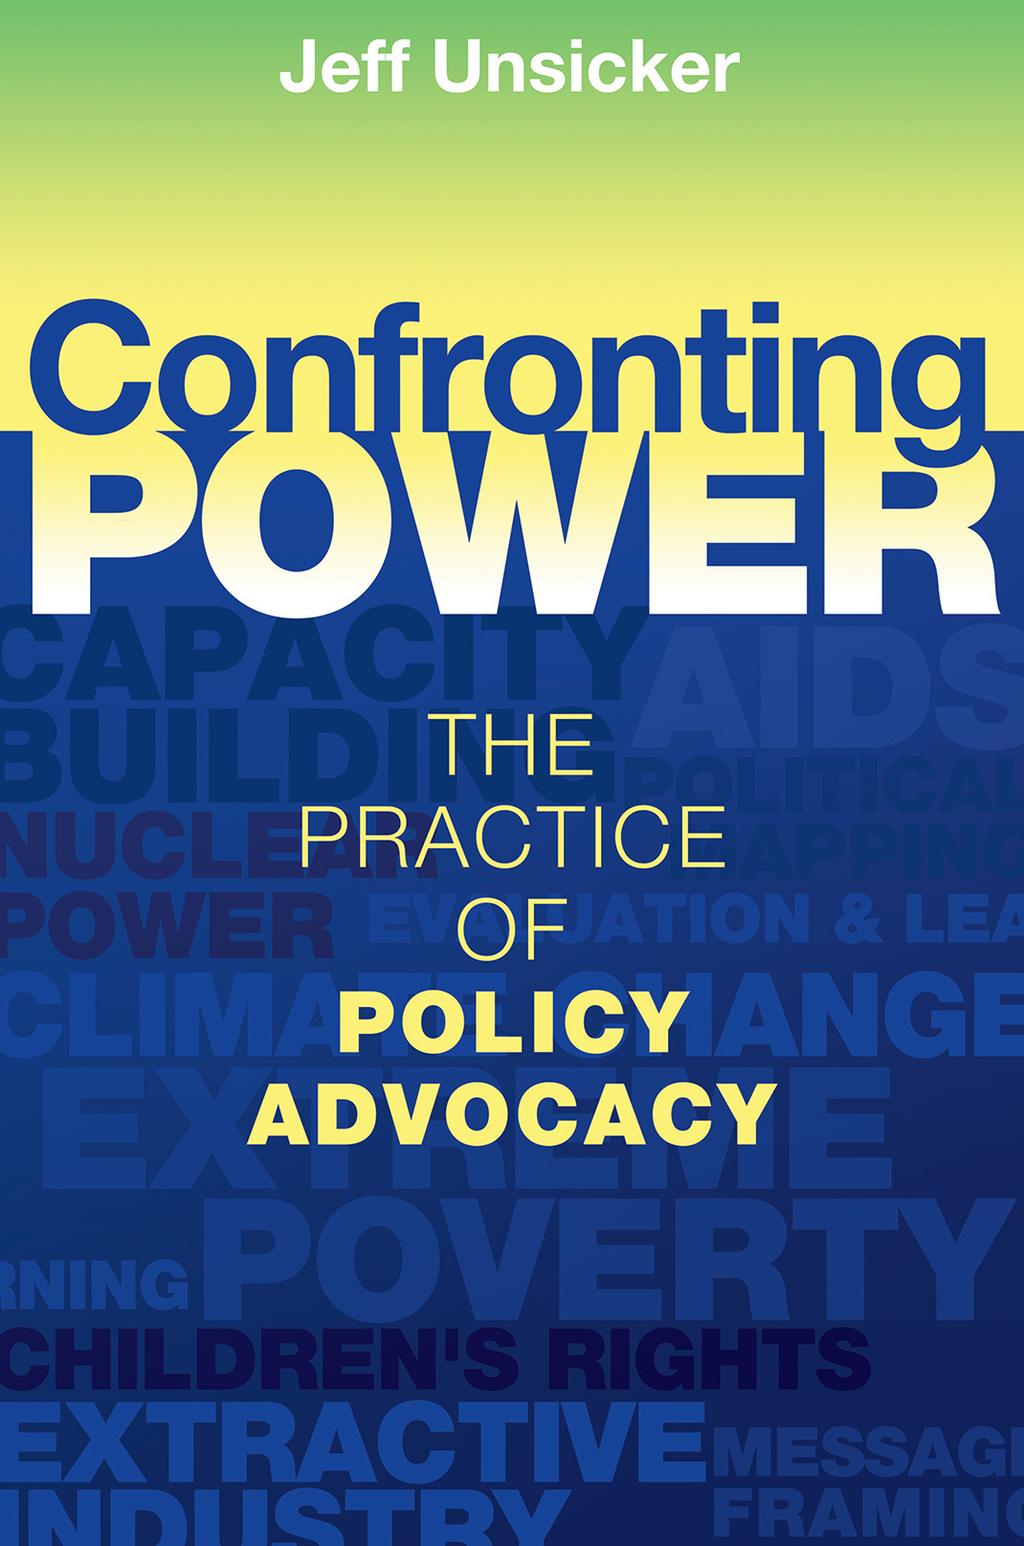 EXCERPTED FROM Confronting Power: The Practice of Policy Advocacy Jeff Unsicker Copyright 2012 ISBNs: 978-1-56549-533-3 hc 978-1-56549-534-0 pb 1800 30th